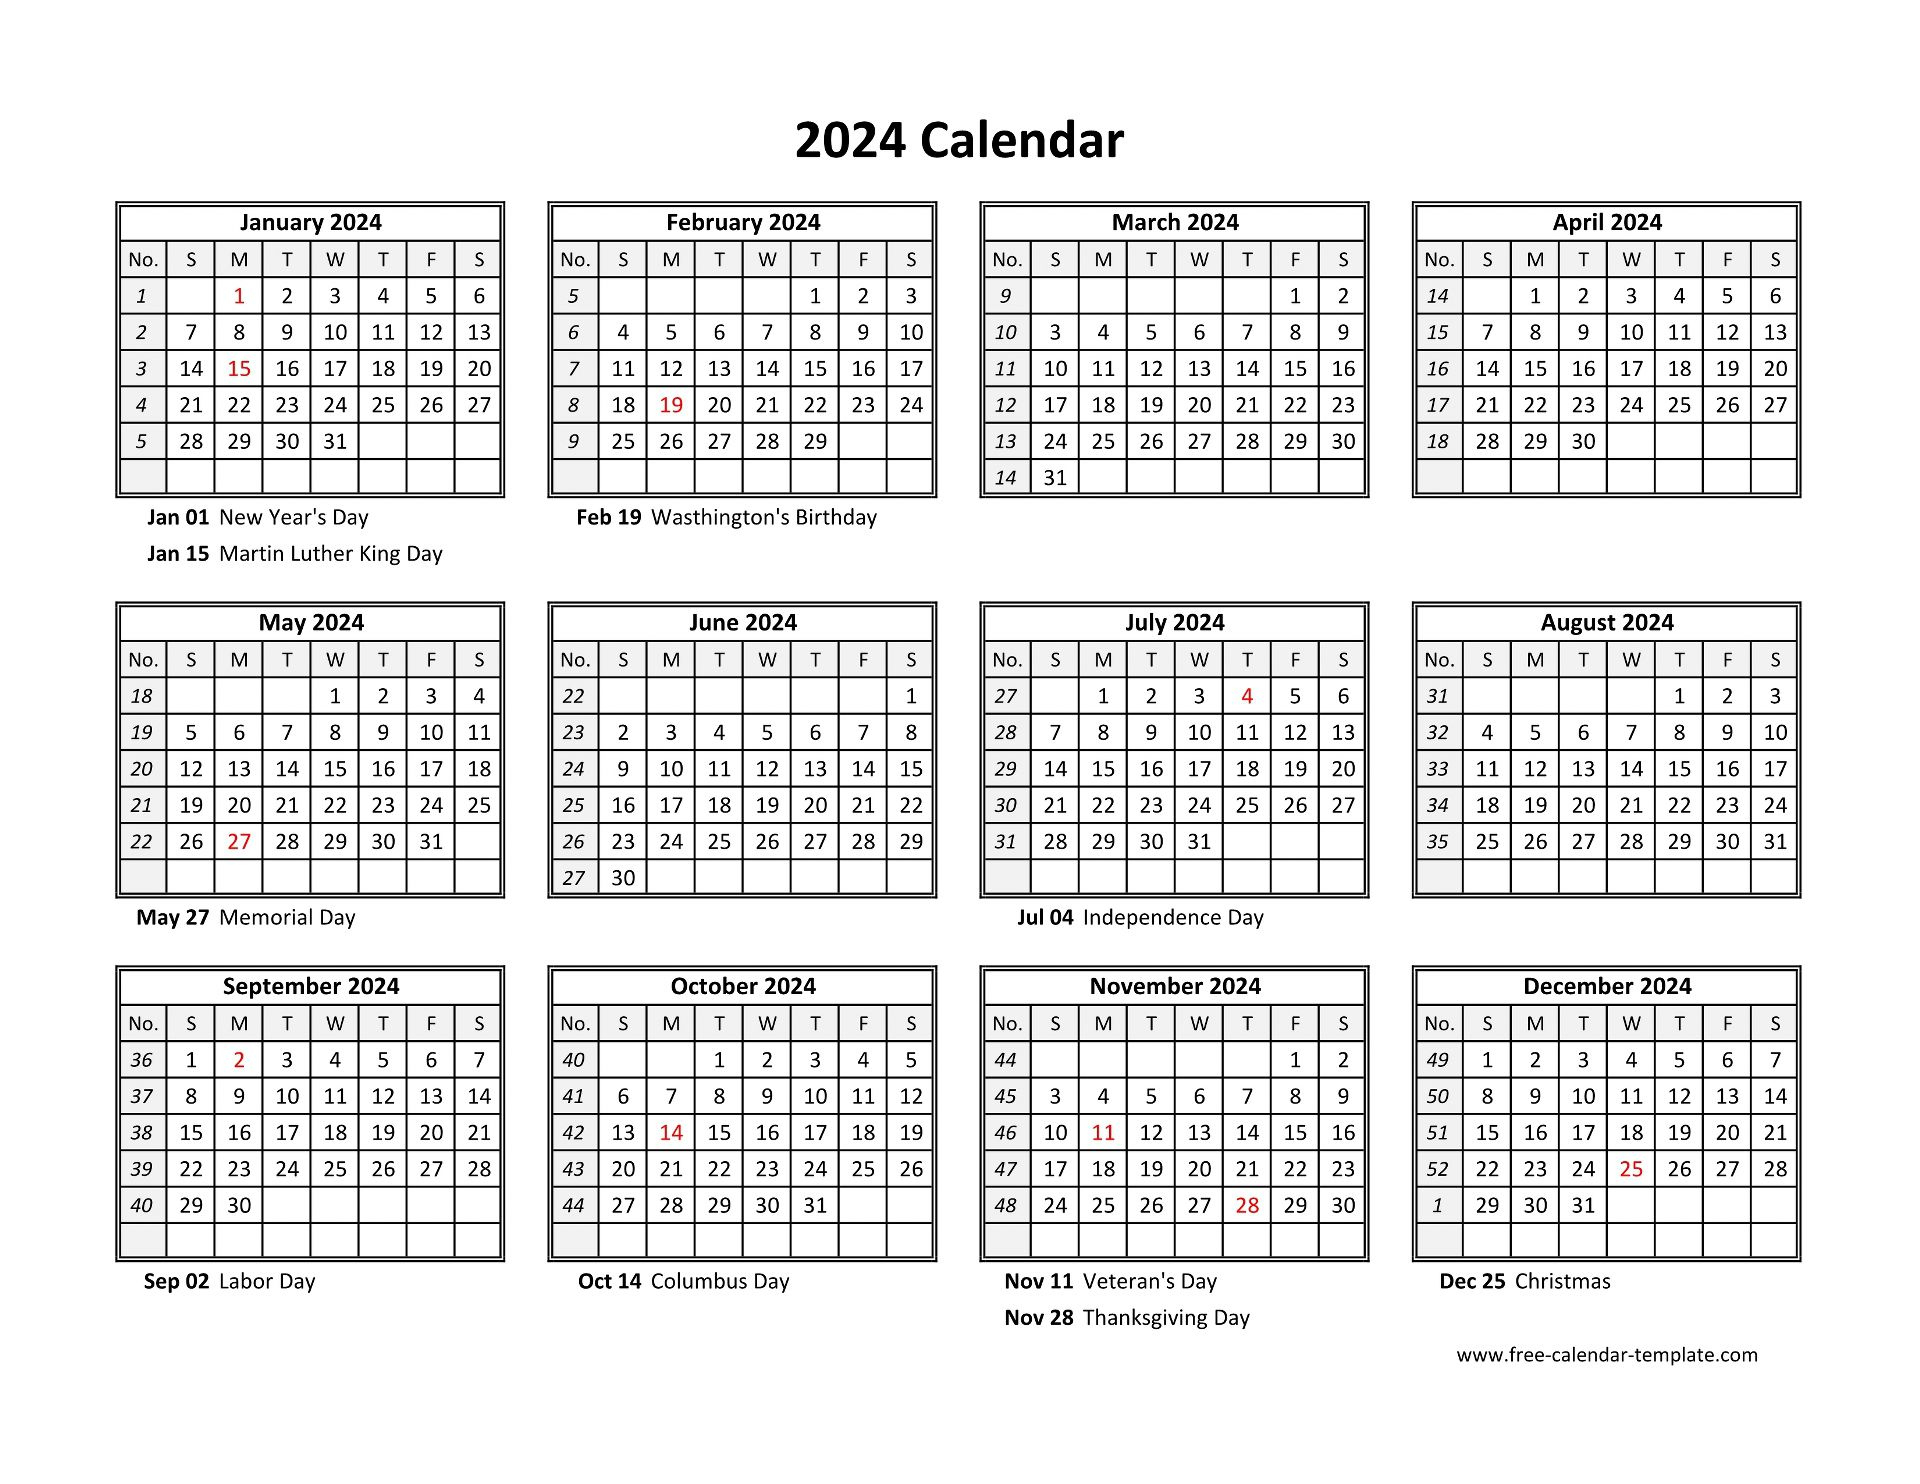 Yearly Calendar 2024 Printable With Federal Holidays | Free | 2024 Printable Calendar One Page With Holidays Free Download